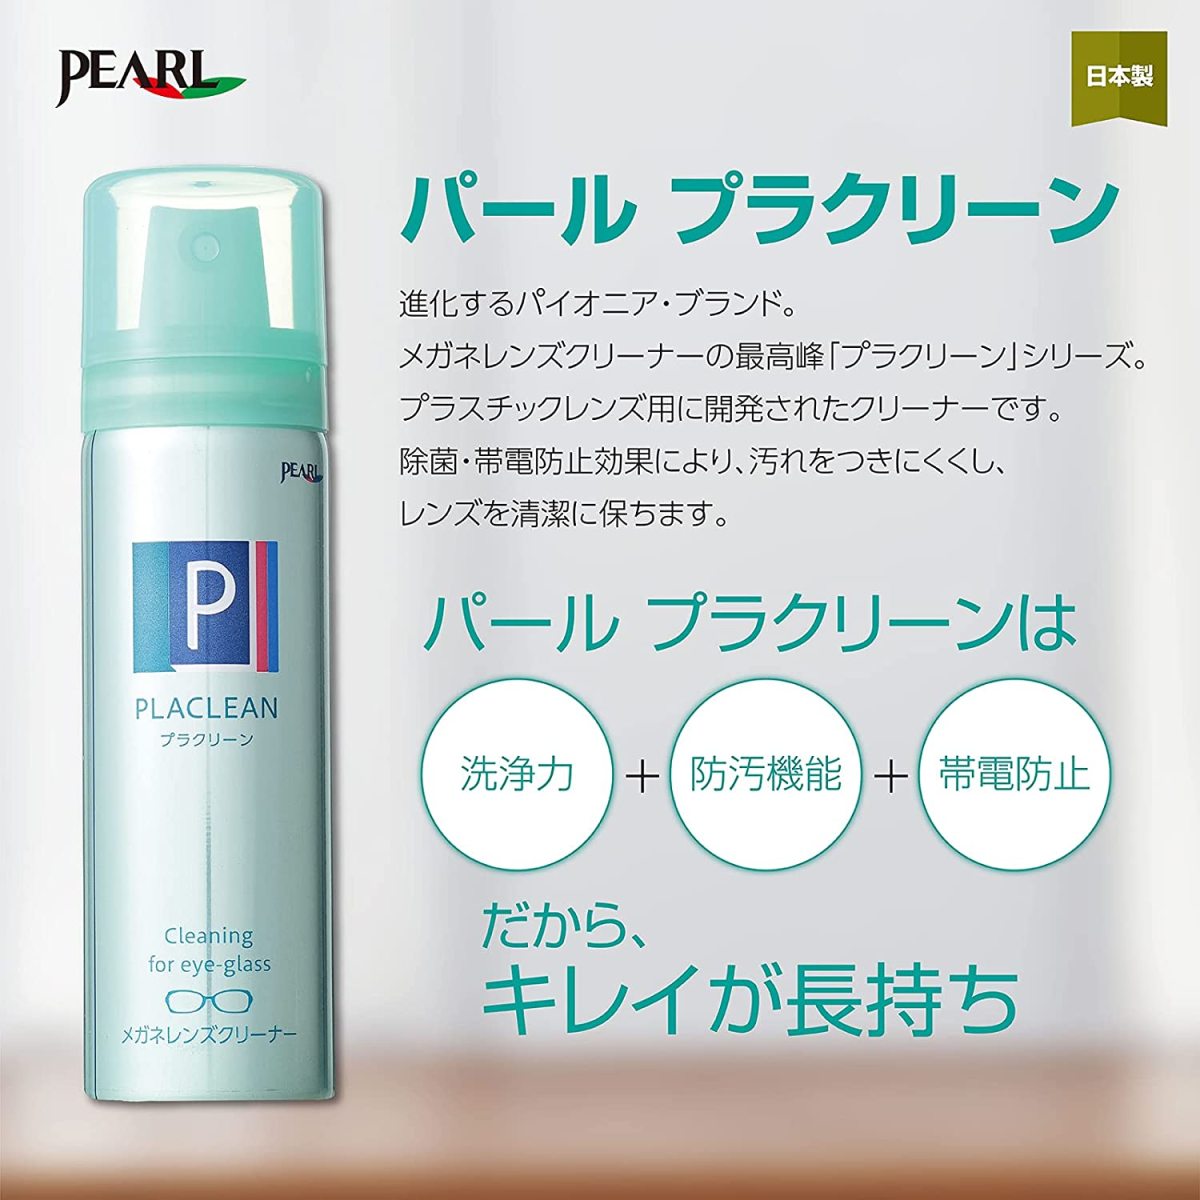  pearl pra clean business use 01054 200ml air zo-ru glasses cleaner glasses glasses .. spray lens electro static charge prevention dirt shampoo made in Japan sunglasses 